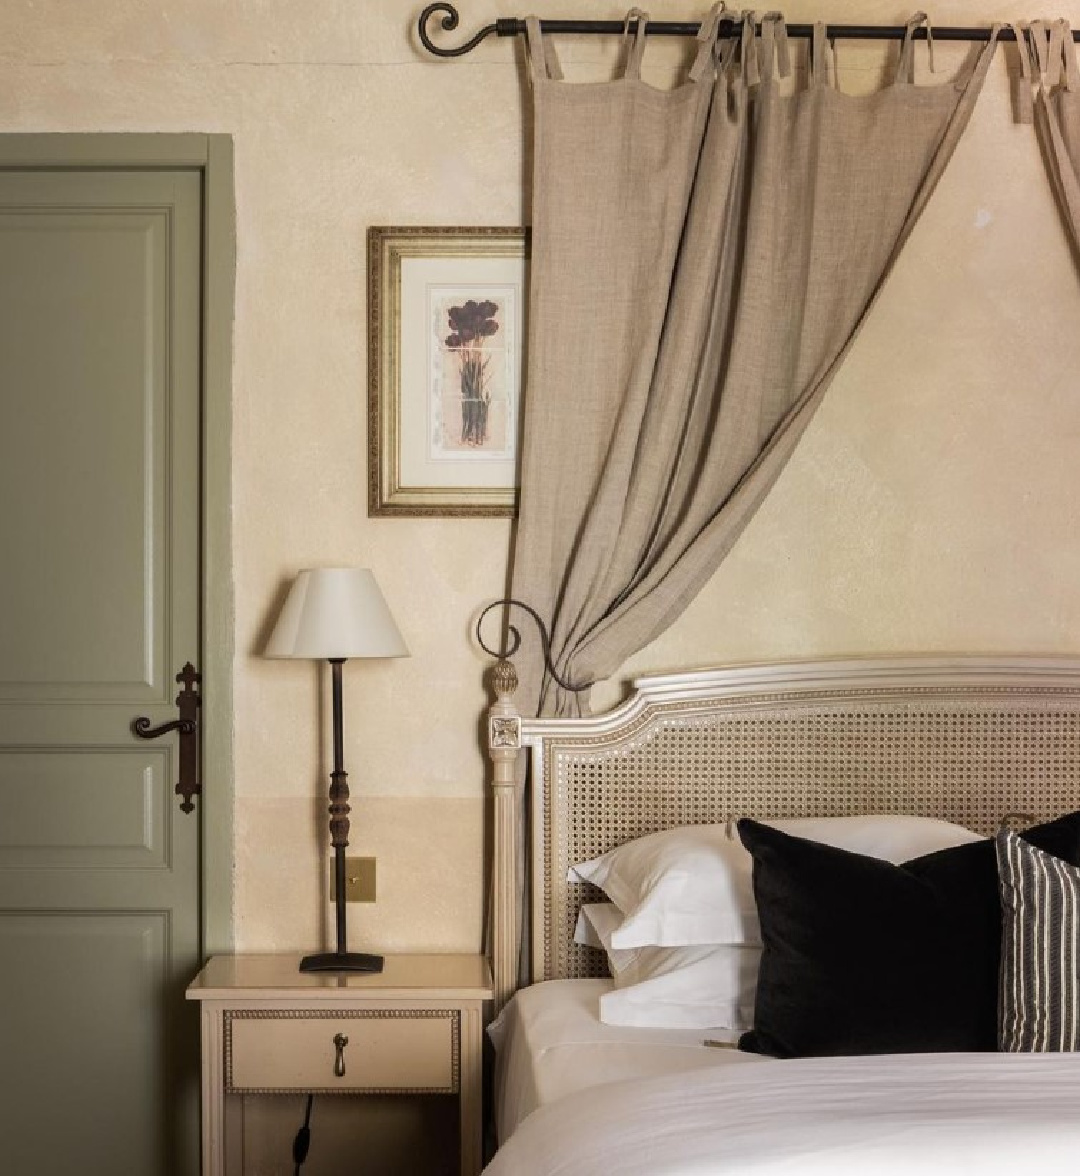 French country bedroom. Warm European luxury and cozy opulence in a French vacation villa in Provence - La Bastide de Laurence. #frenchbastide #frenchvilla #luxuryvilla #provencevilla #warmeuropeanluxury #cozyopulence #provencehomes #frenchcountryinterior